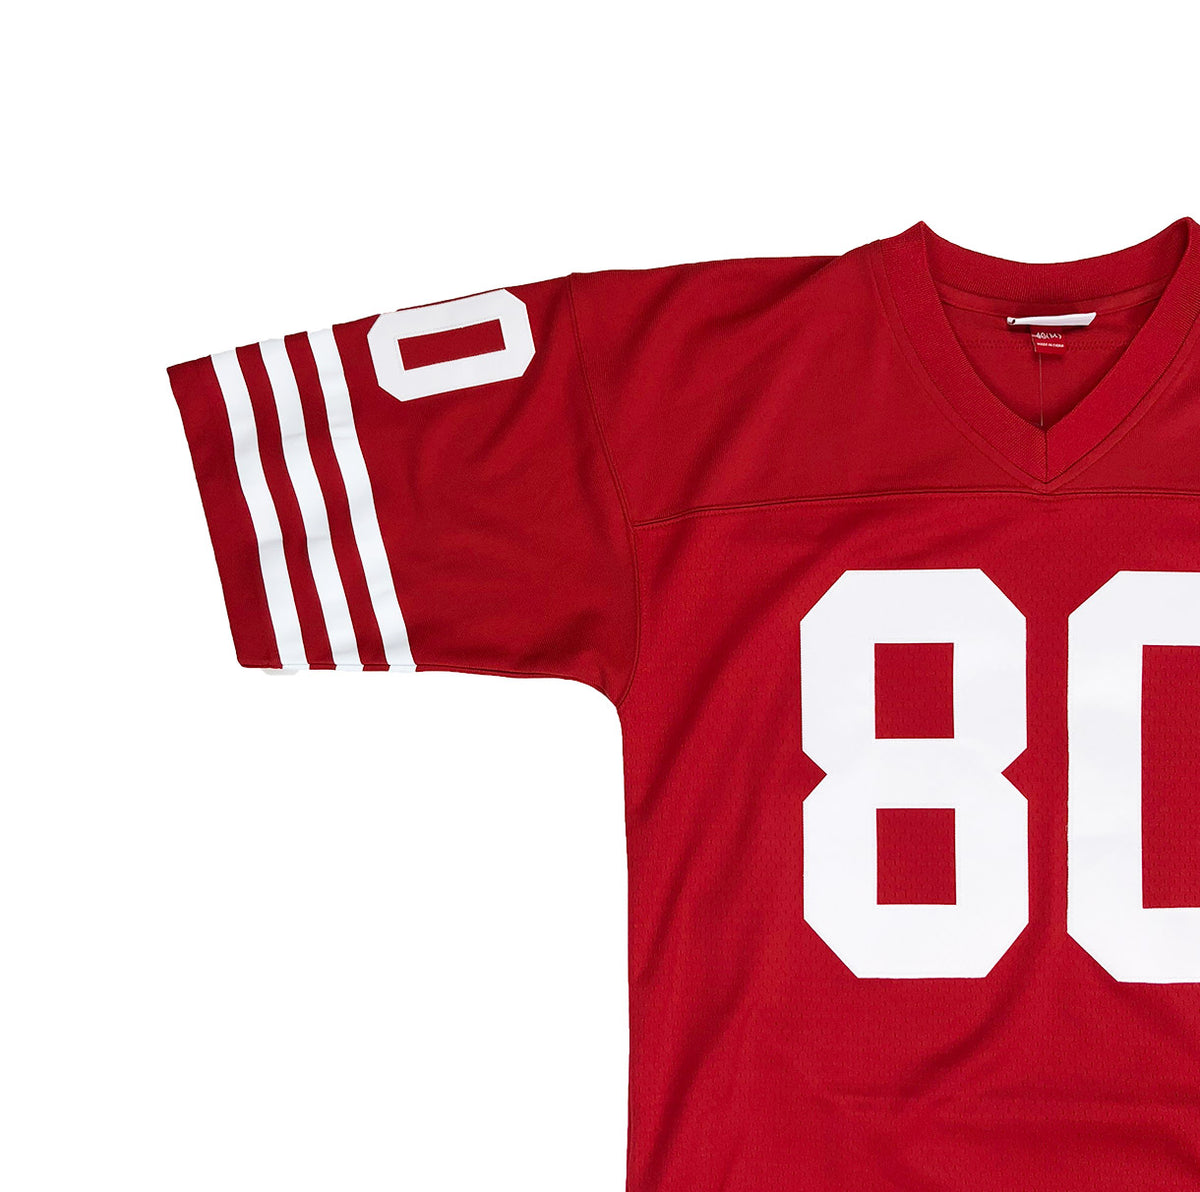 jerry rice throwback jersey mitchell ness